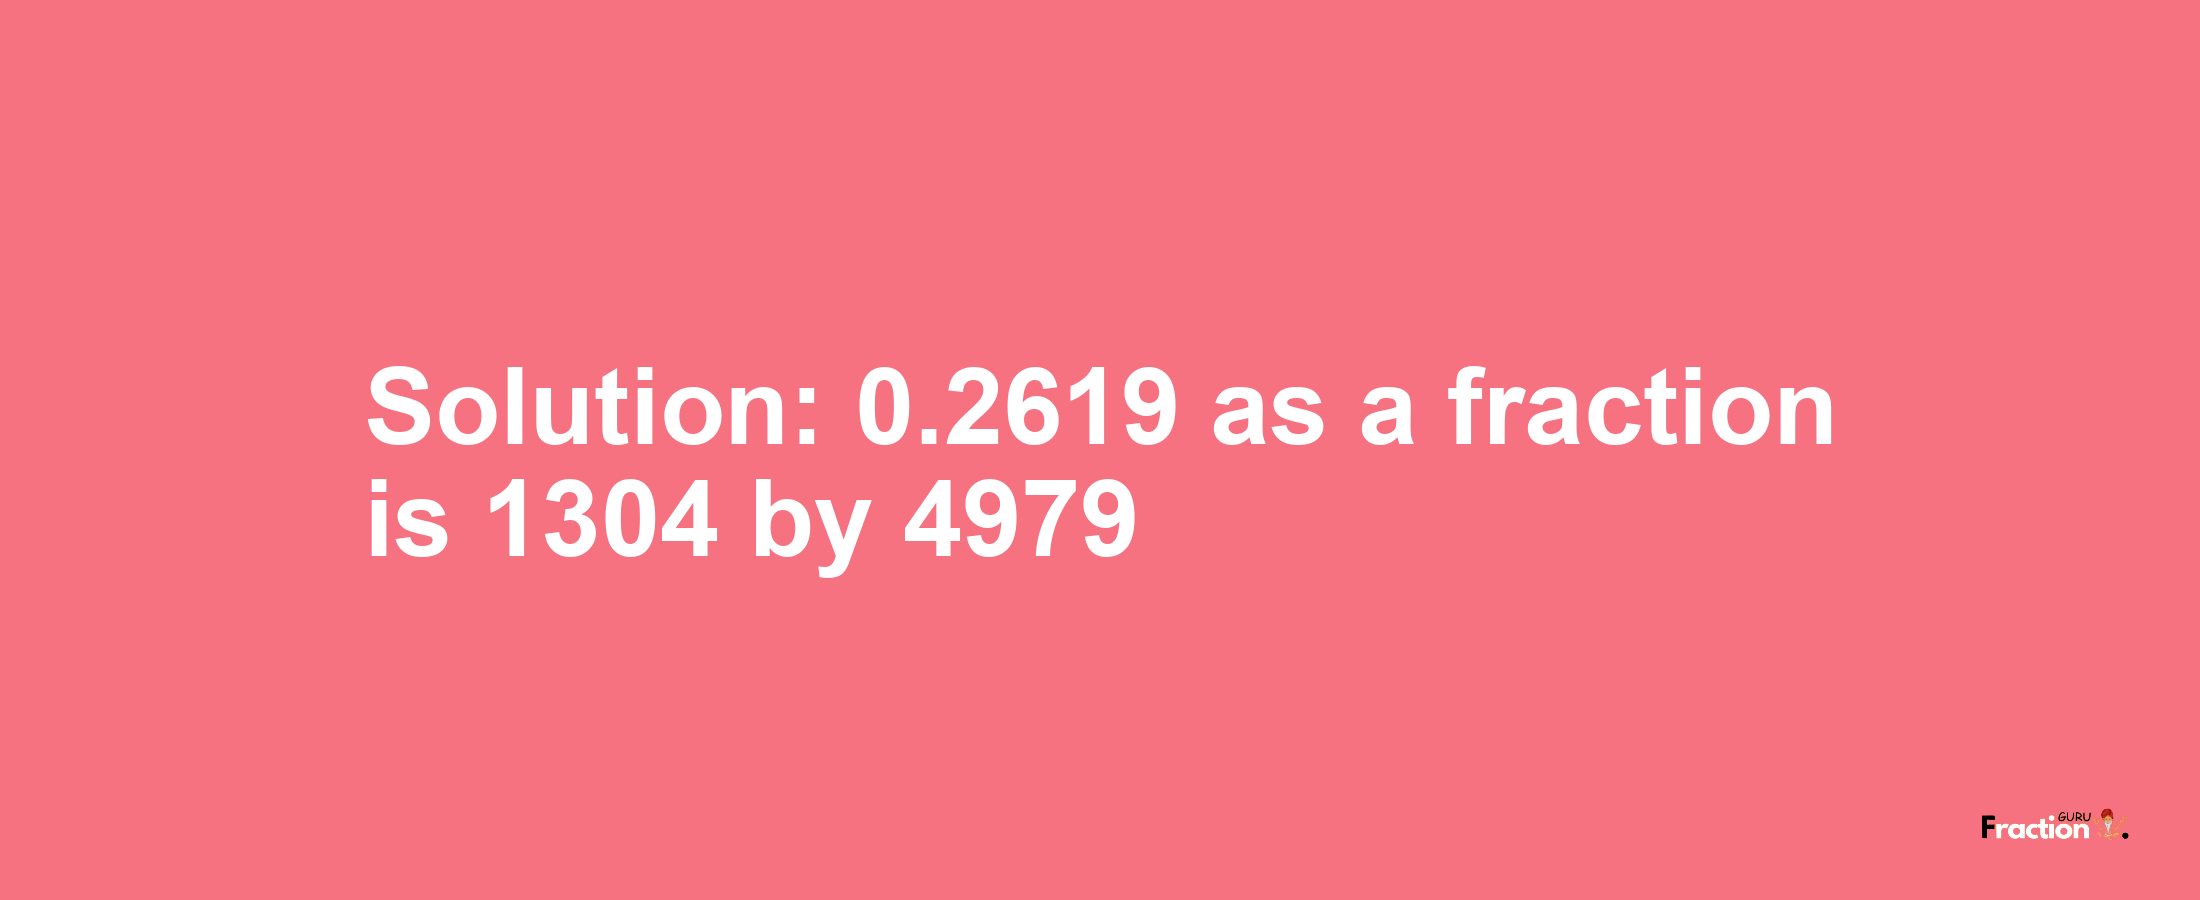 Solution:0.2619 as a fraction is 1304/4979